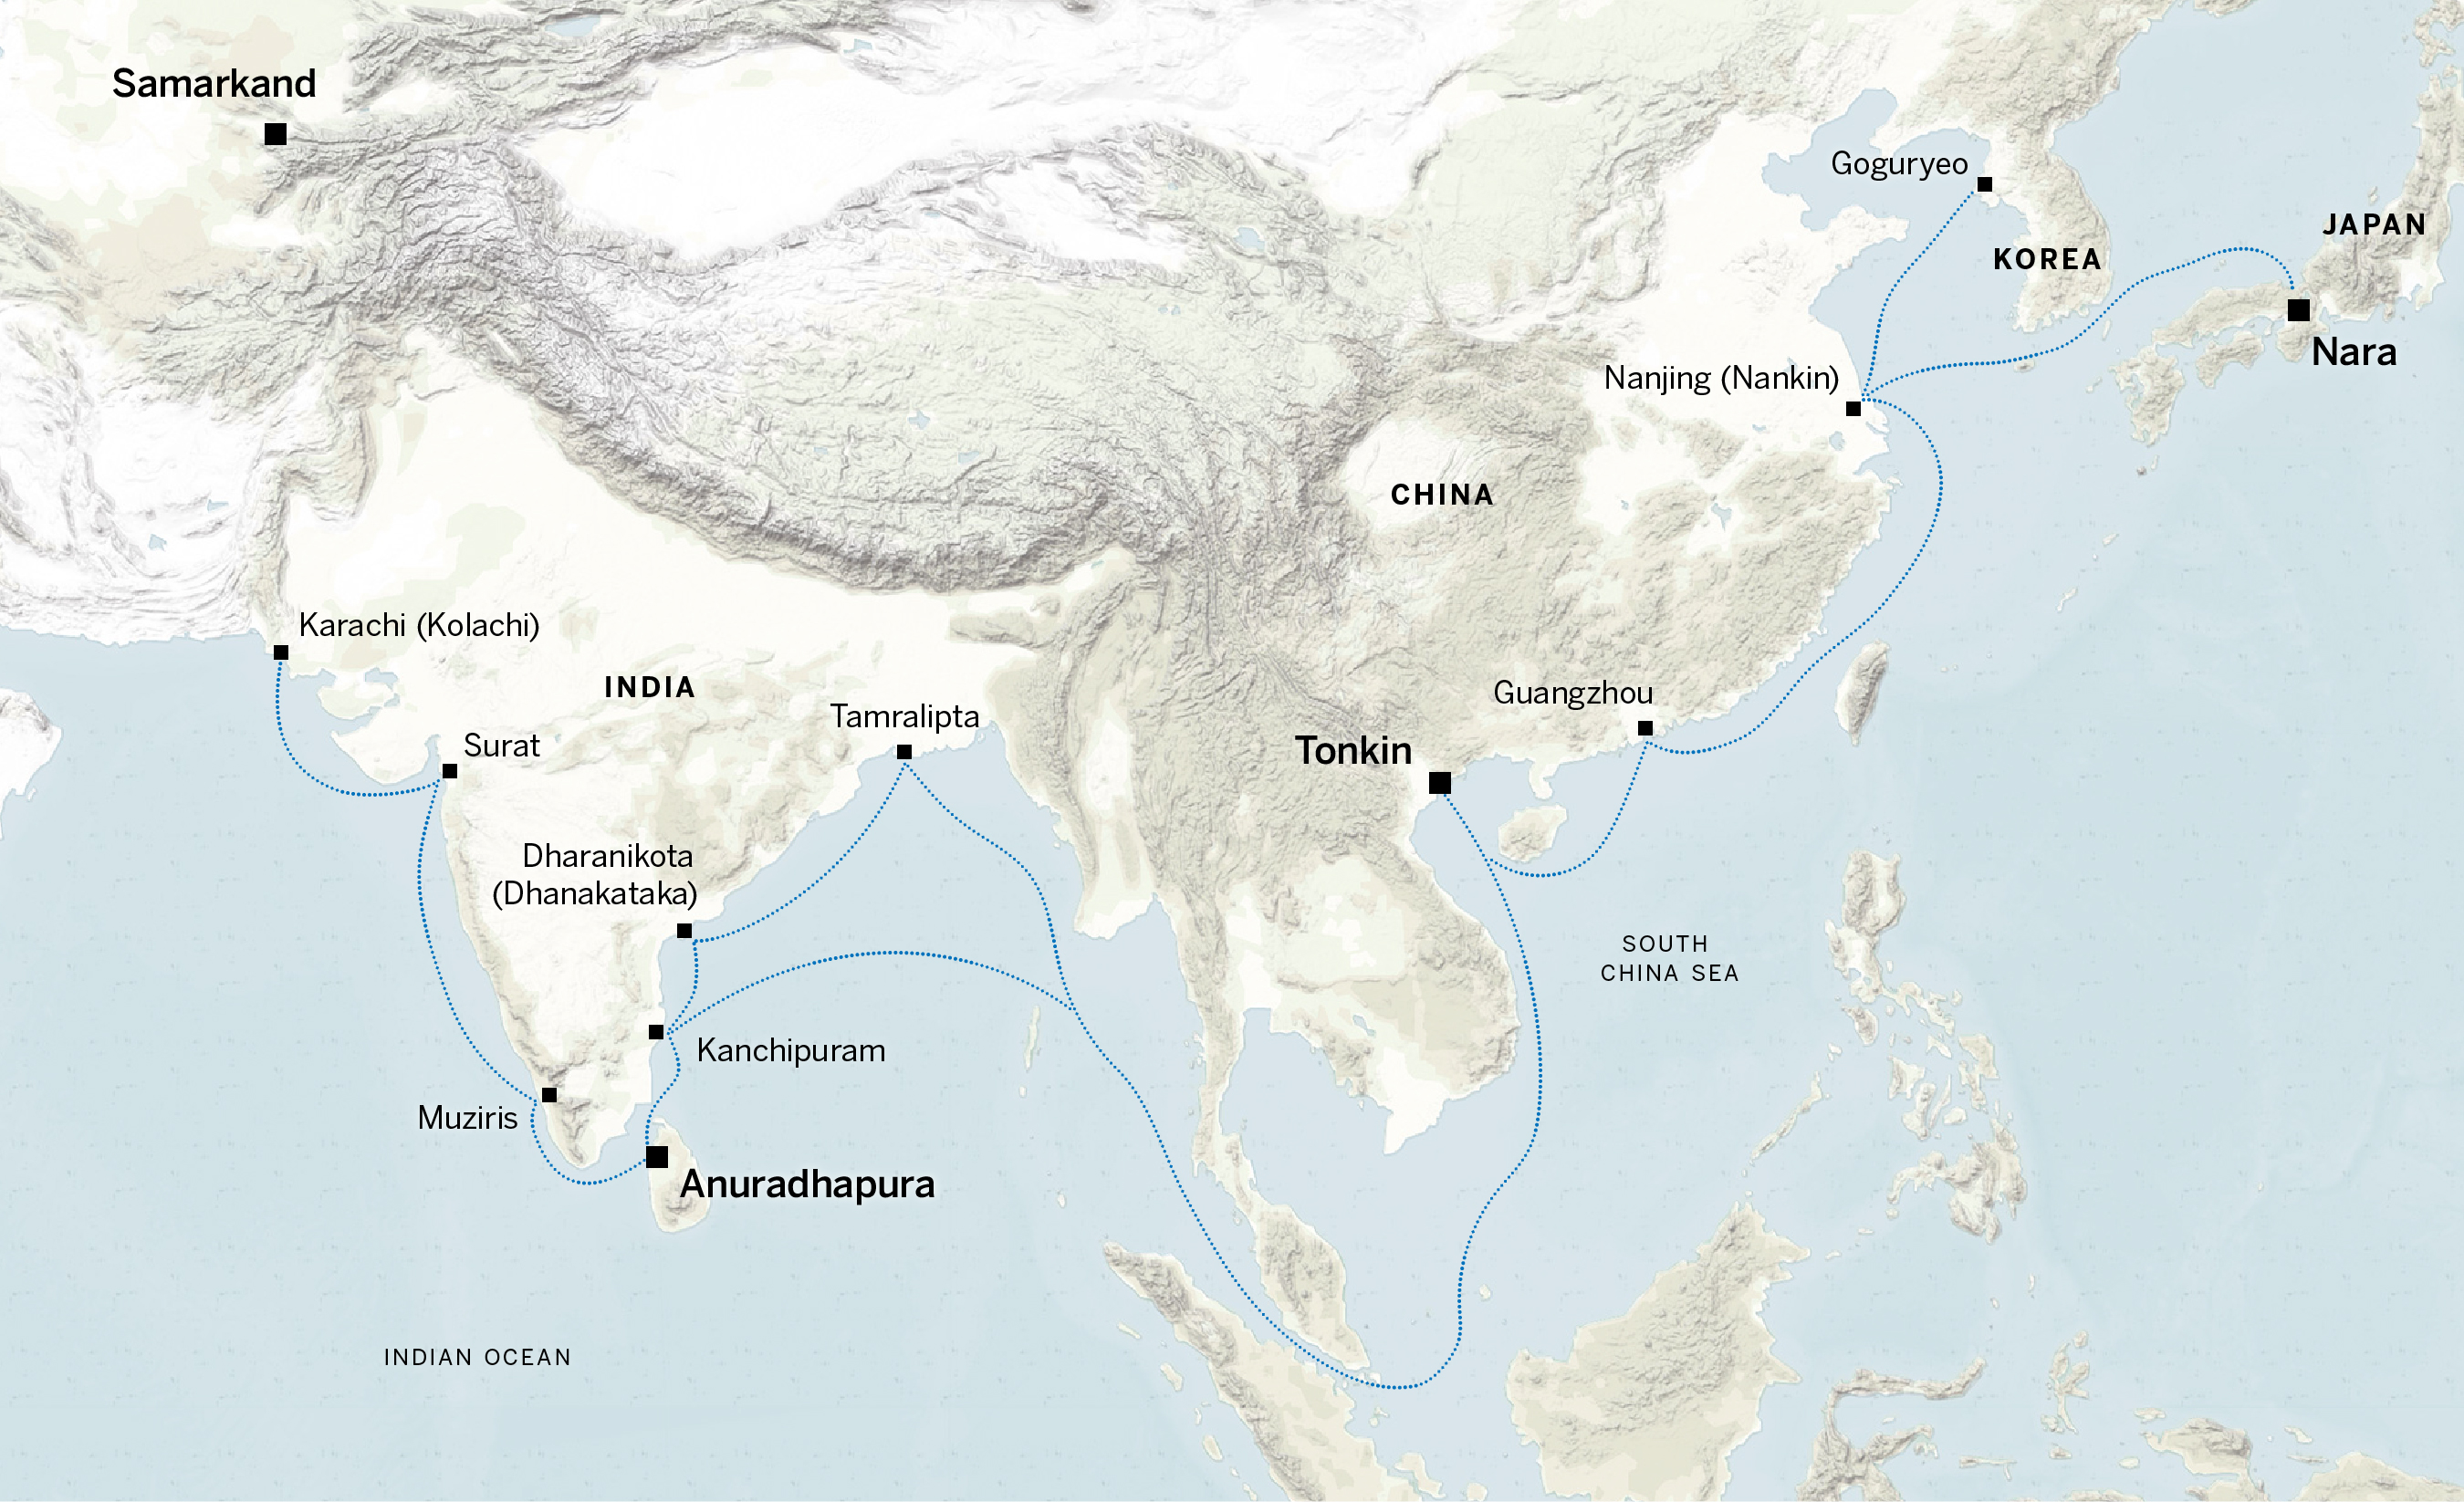 Sea routes connected Karachi in Pakistan to Nara in Japan